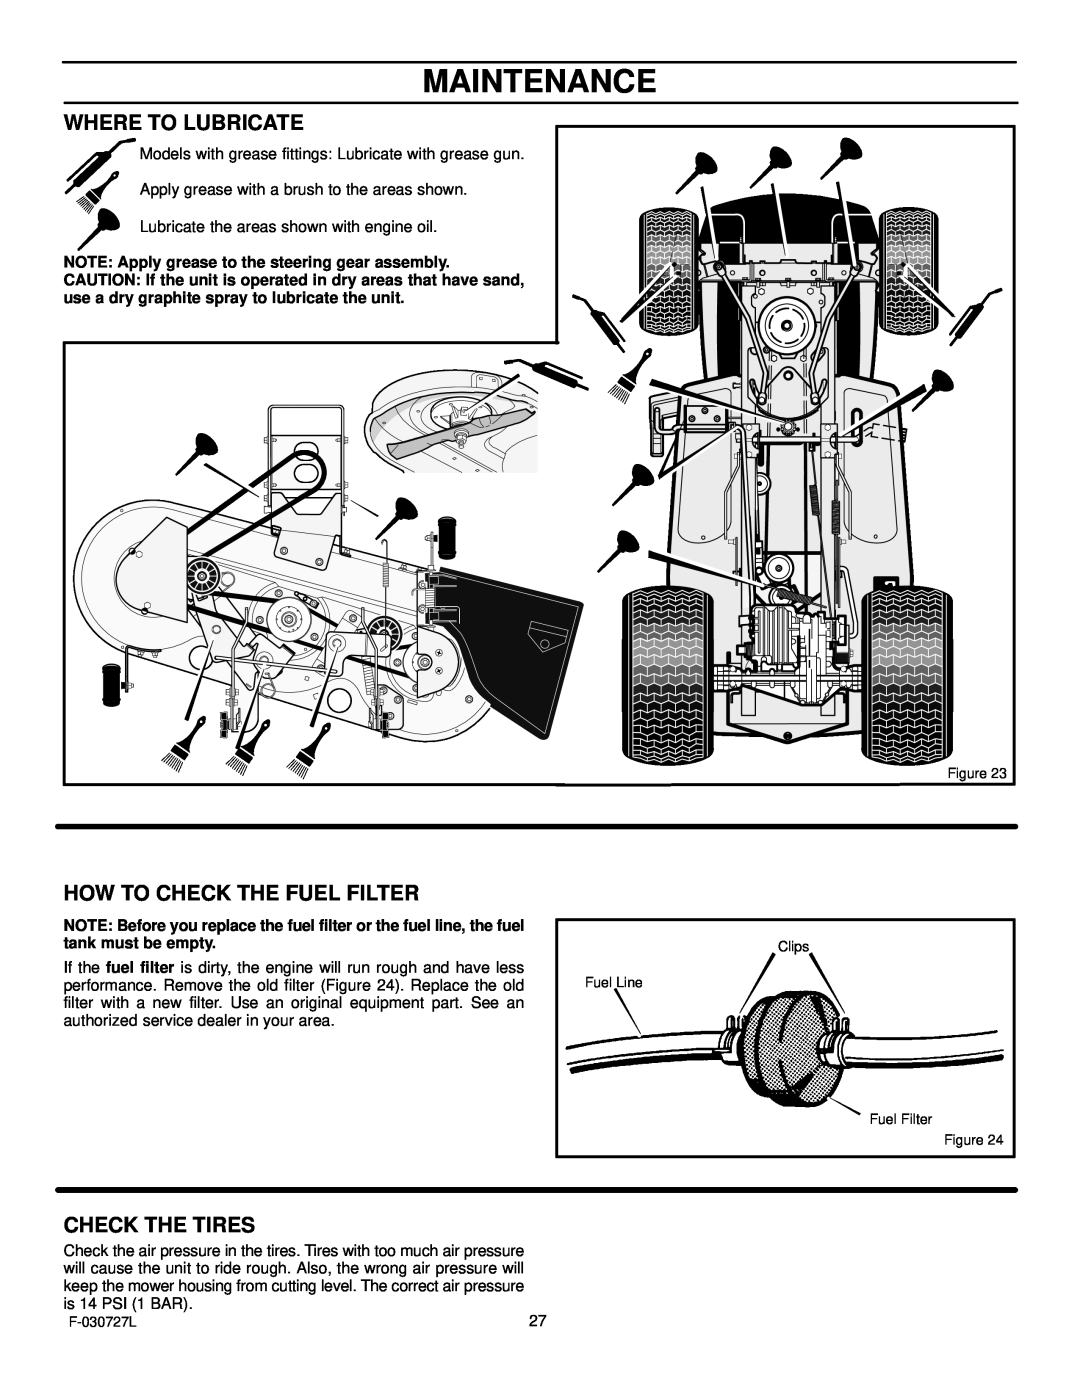 Murray 465600x8A manual Maintenance, Where To Lubricate, How To Check The Fuel Filter, Check The Tires 